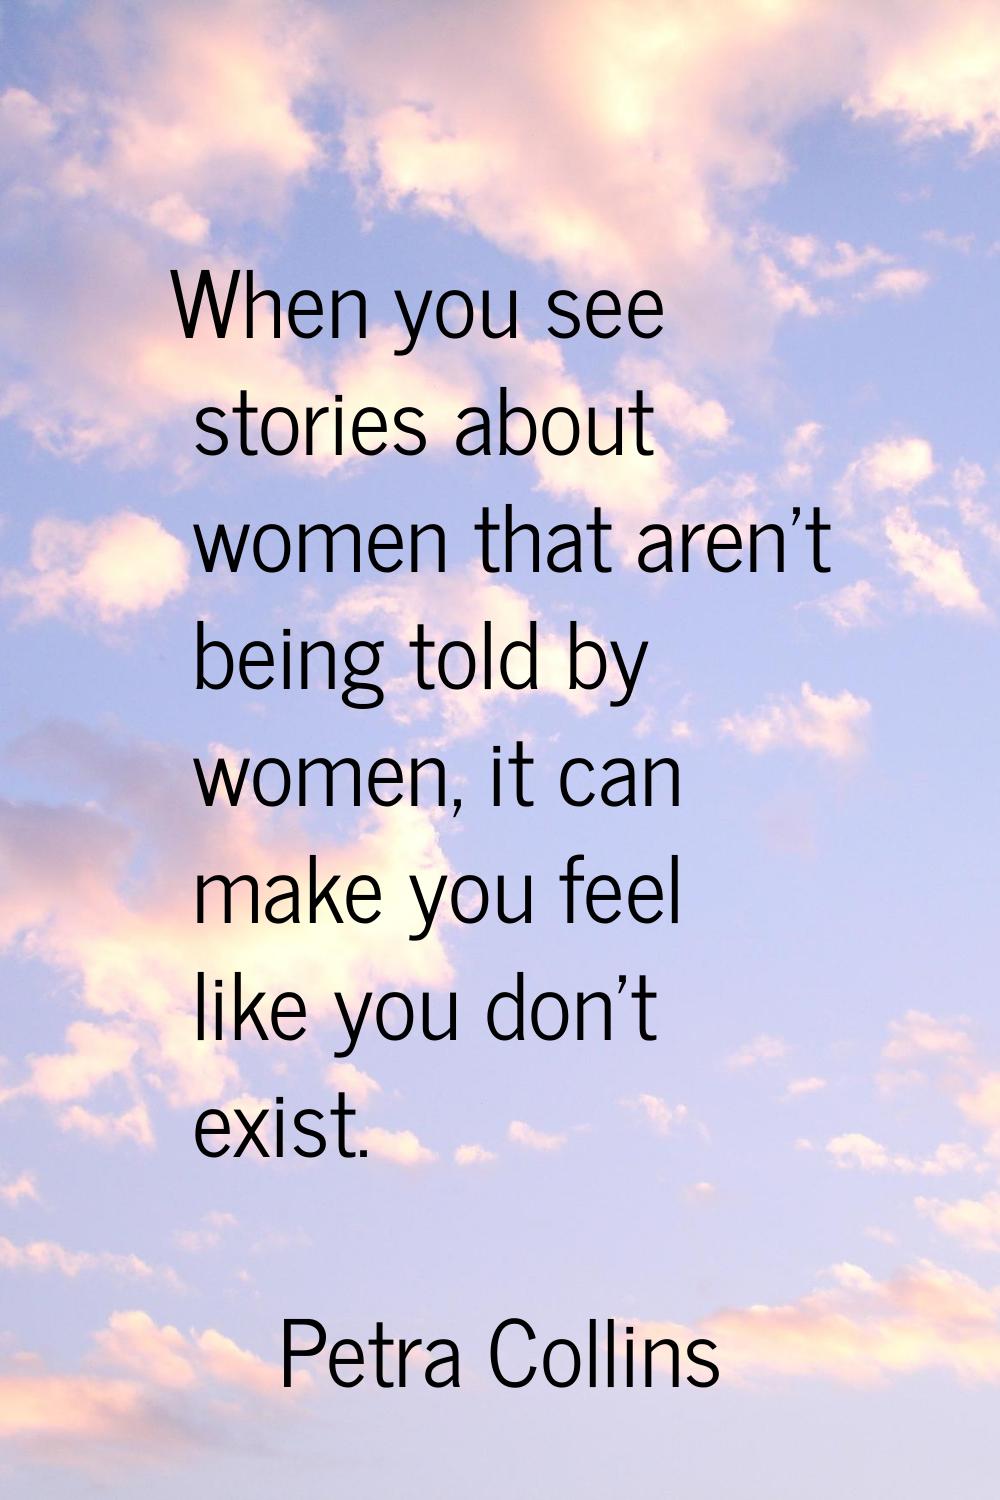 When you see stories about women that aren't being told by women, it can make you feel like you don